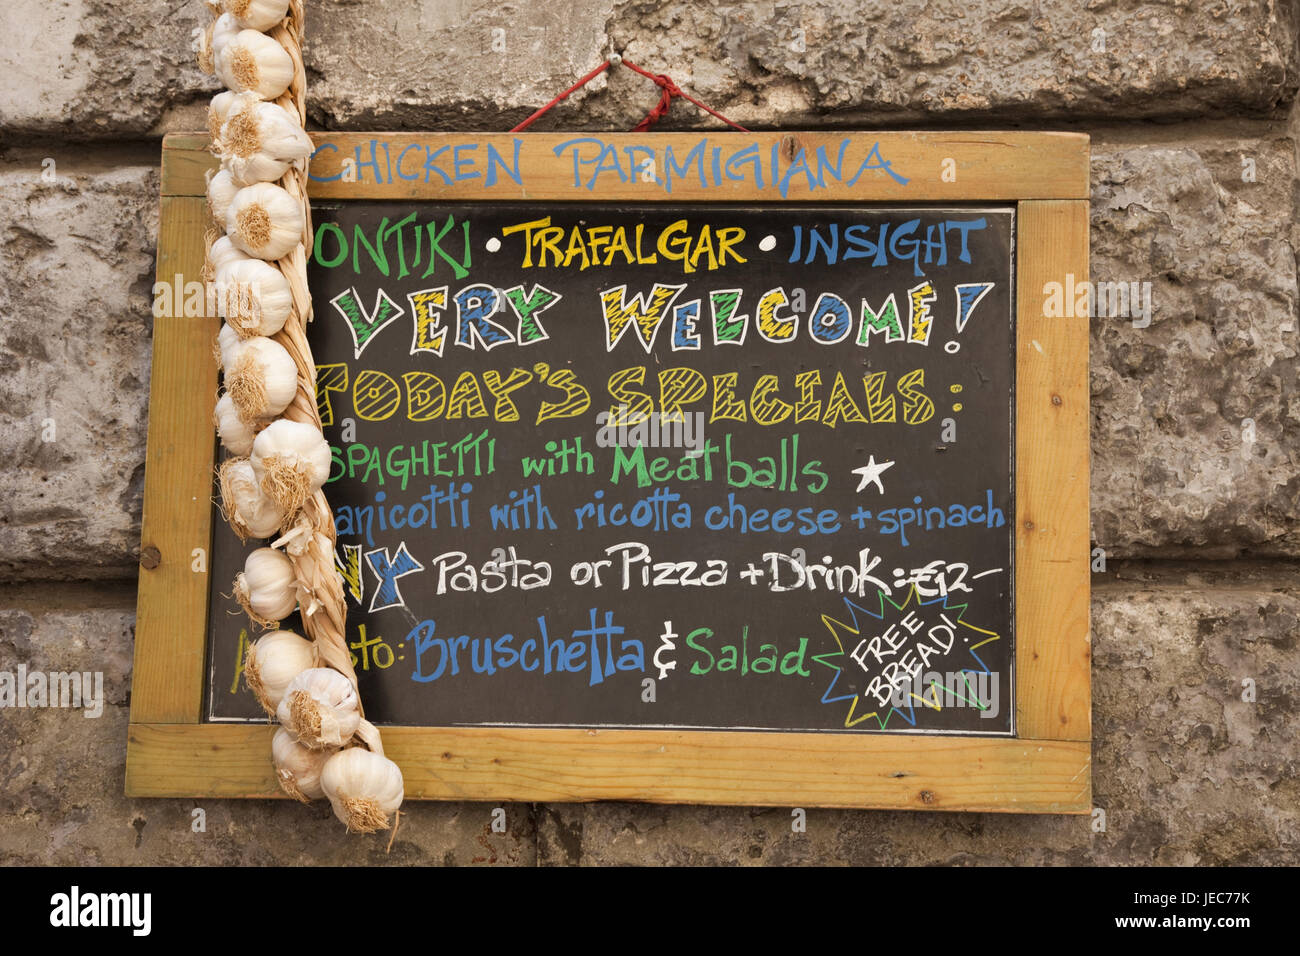 Italy, Rome, typical tourist bar, outside, notice board, menu, Stock Photo